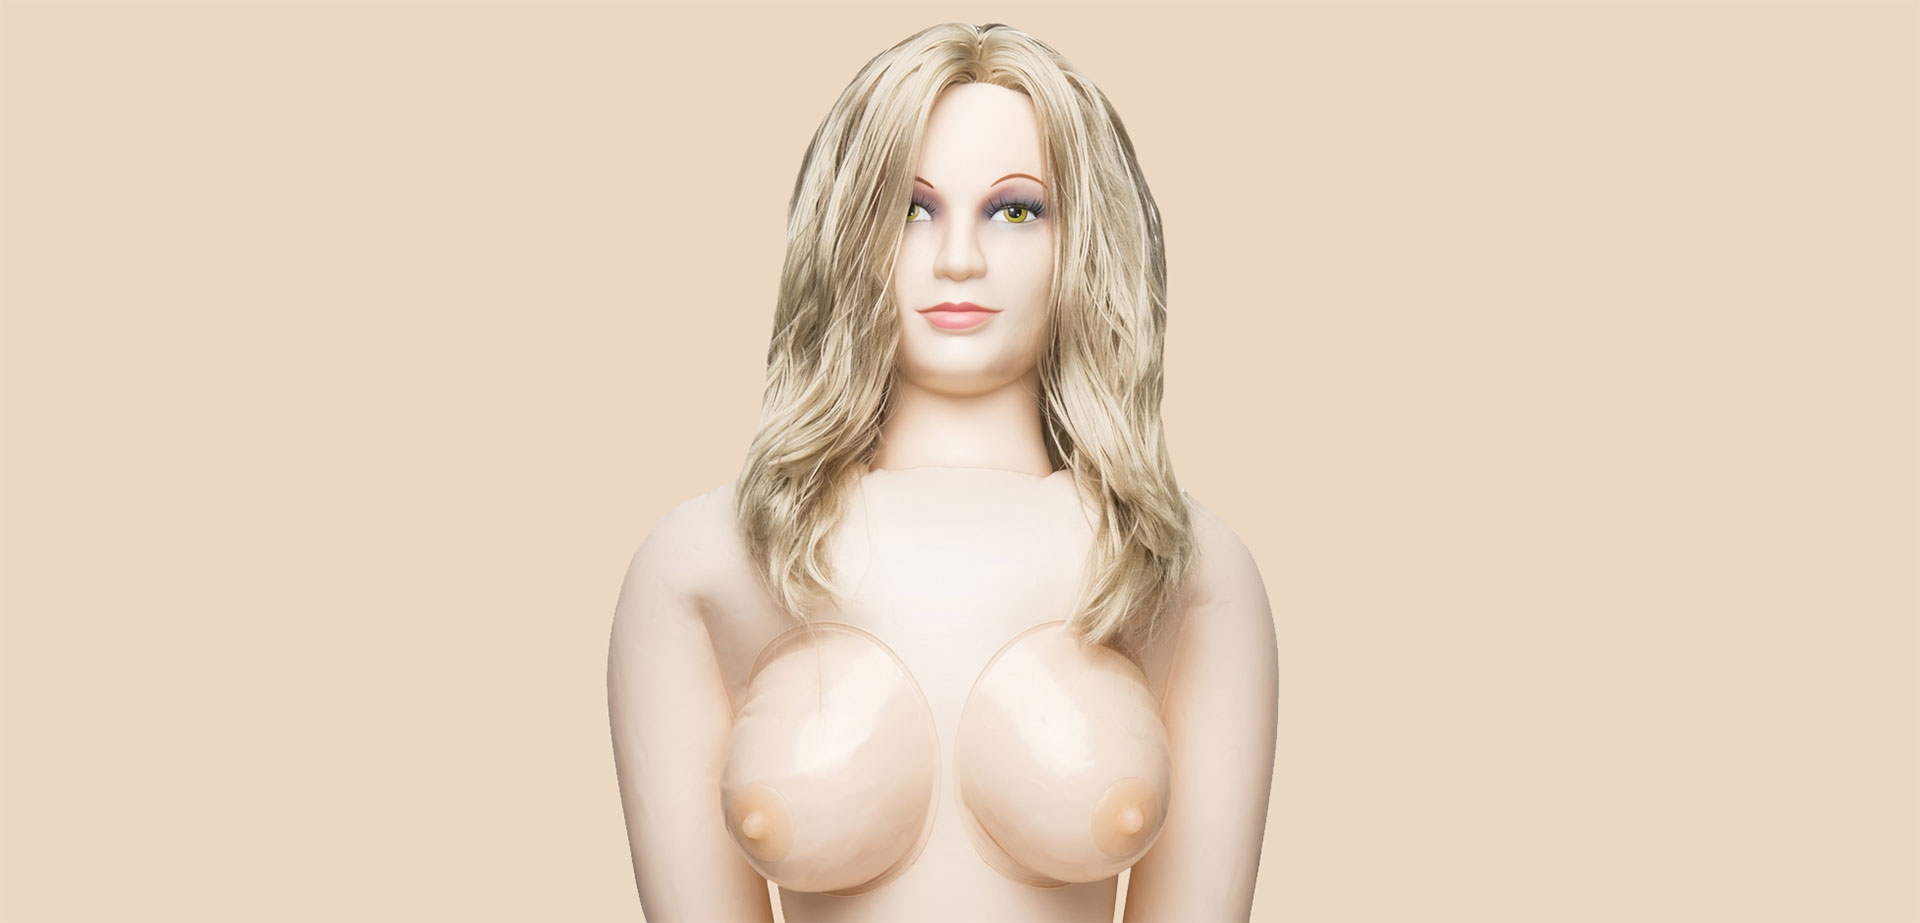 nflatable Sex Doll.